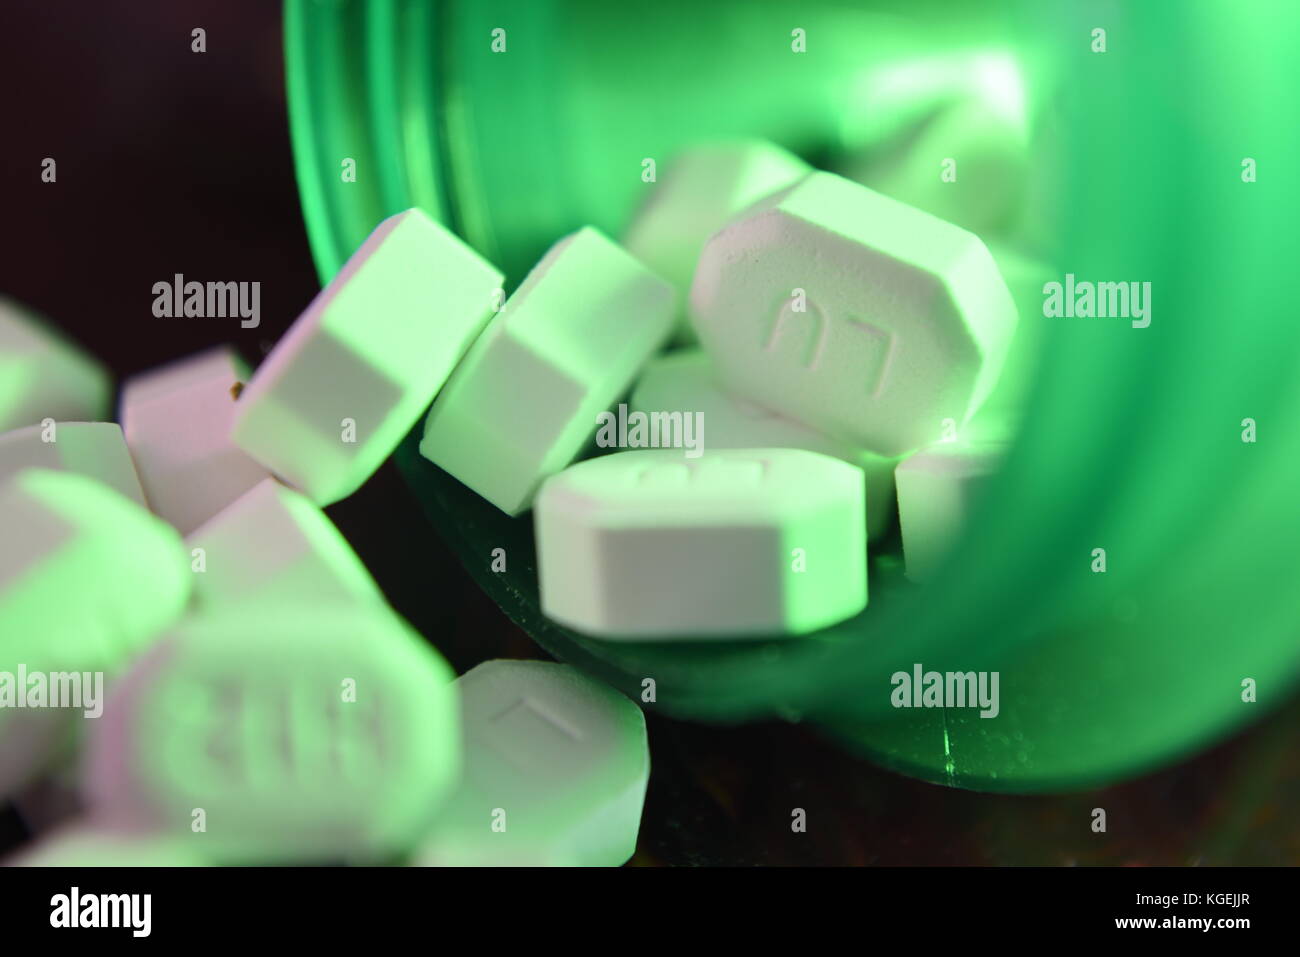 Macro and closeup shot of white pills spilling from green bottle Stock Photo